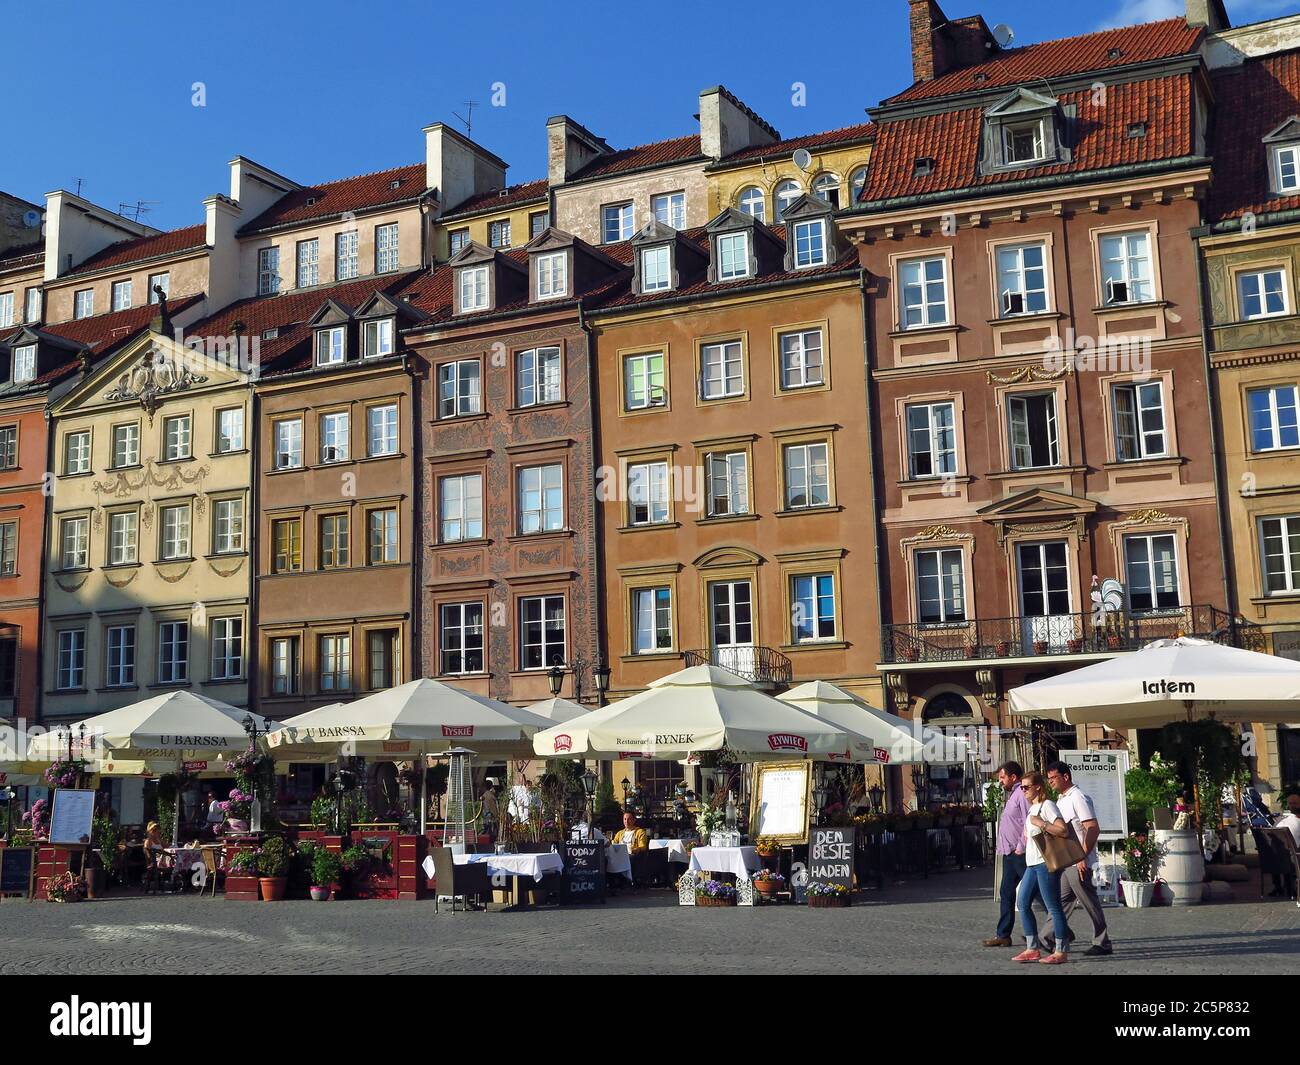 Restaurant on Warsaw's Old Town Square, surrounded by houses rebuilt after World War II. The area belongs to UNESCO heritages. Stock Photo